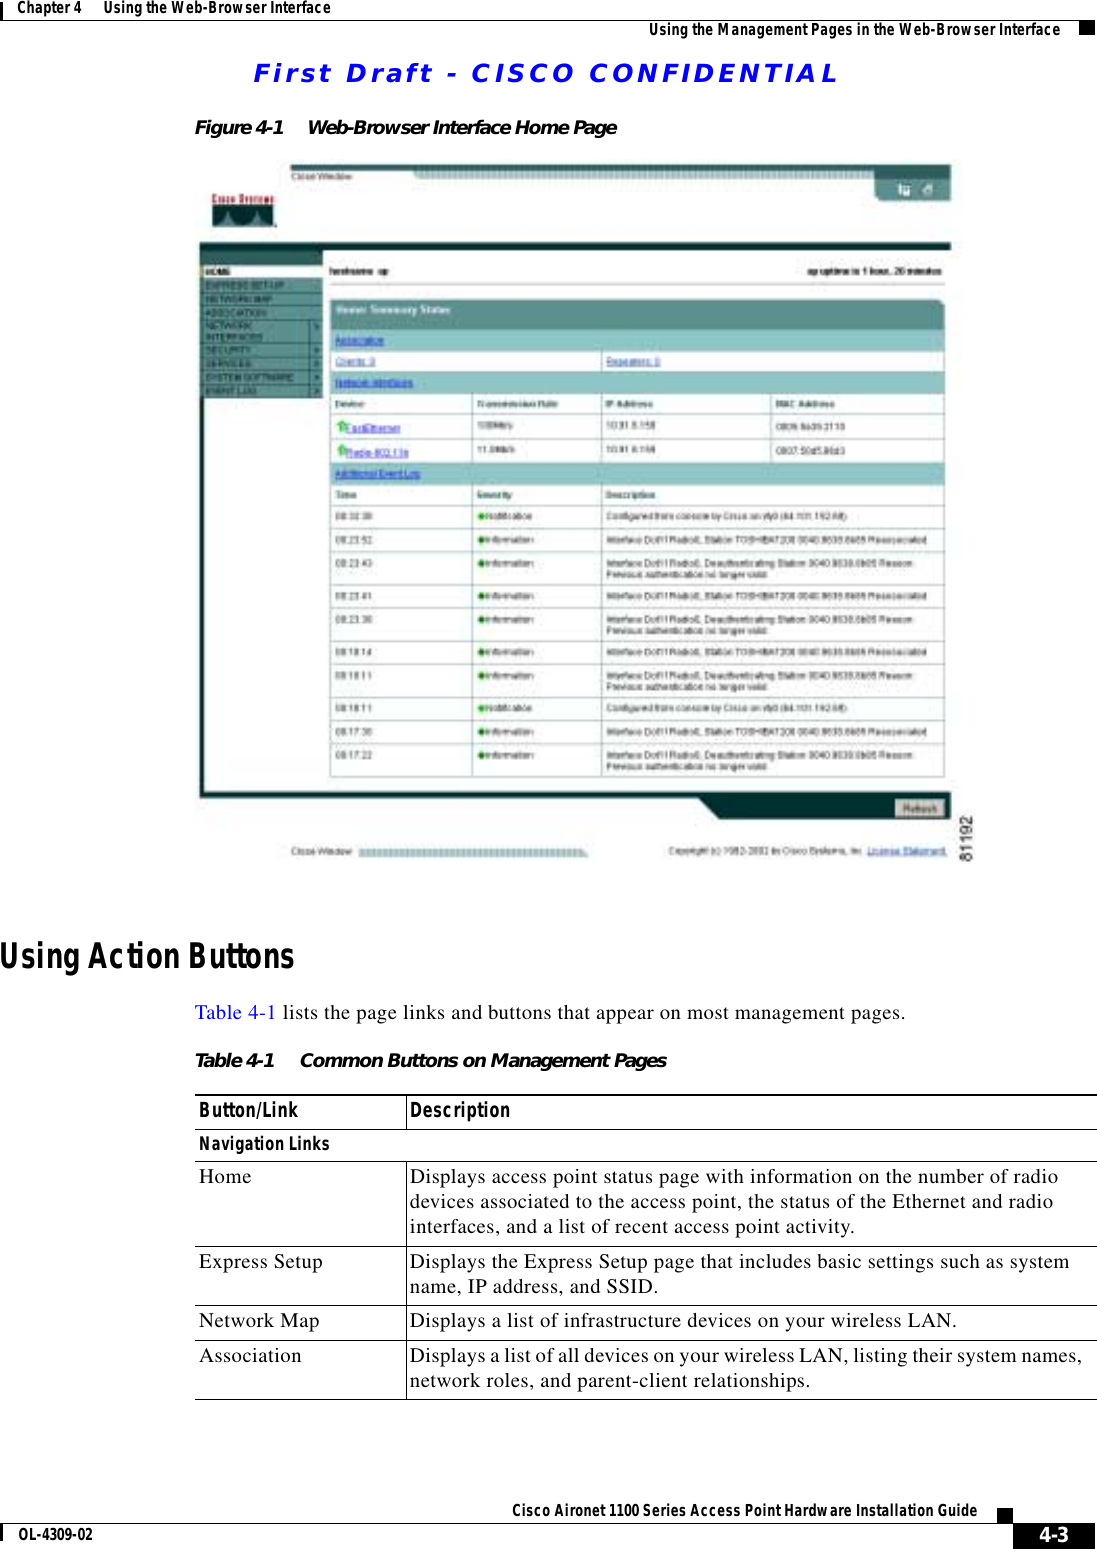 First Draft - CISCO CONFIDENTIAL4-3Cisco Aironet 1100 Series Access Point Hardware Installation GuideOL-4309-02Chapter 4      Using the Web-Browser Interface Using the Management Pages in the Web-Browser InterfaceFigure 4-1 Web-Browser Interface Home PageUsing Action ButtonsTable 4-1 lists the page links and buttons that appear on most management pages.Table 4-1 Common Buttons on Management PagesButton/Link DescriptionNavigation LinksHome Displays access point status page with information on the number of radio devices associated to the access point, the status of the Ethernet and radio interfaces, and a list of recent access point activity.Express Setup Displays the Express Setup page that includes basic settings such as system name, IP address, and SSID.Network Map Displays a list of infrastructure devices on your wireless LAN.Association Displays a list of all devices on your wireless LAN, listing their system names, network roles, and parent-client relationships.